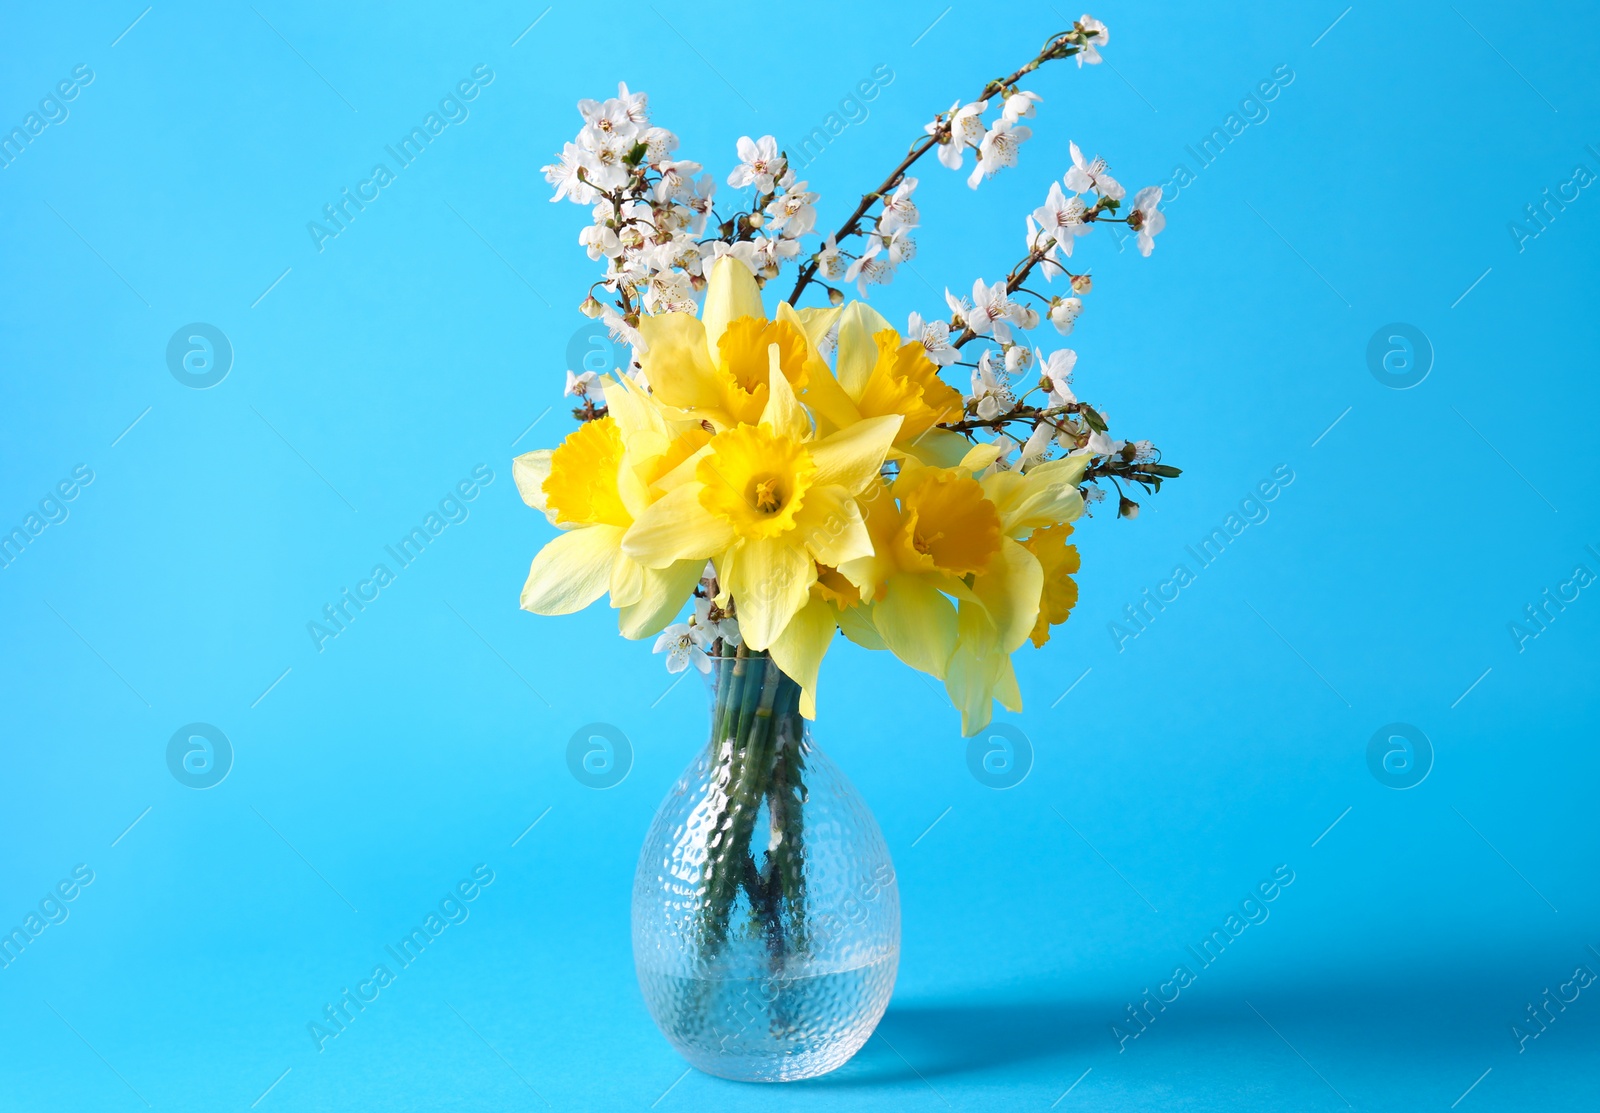 Photo of Bouquet of beautiful yellow daffodils and cherry blossom in vase on light blue background